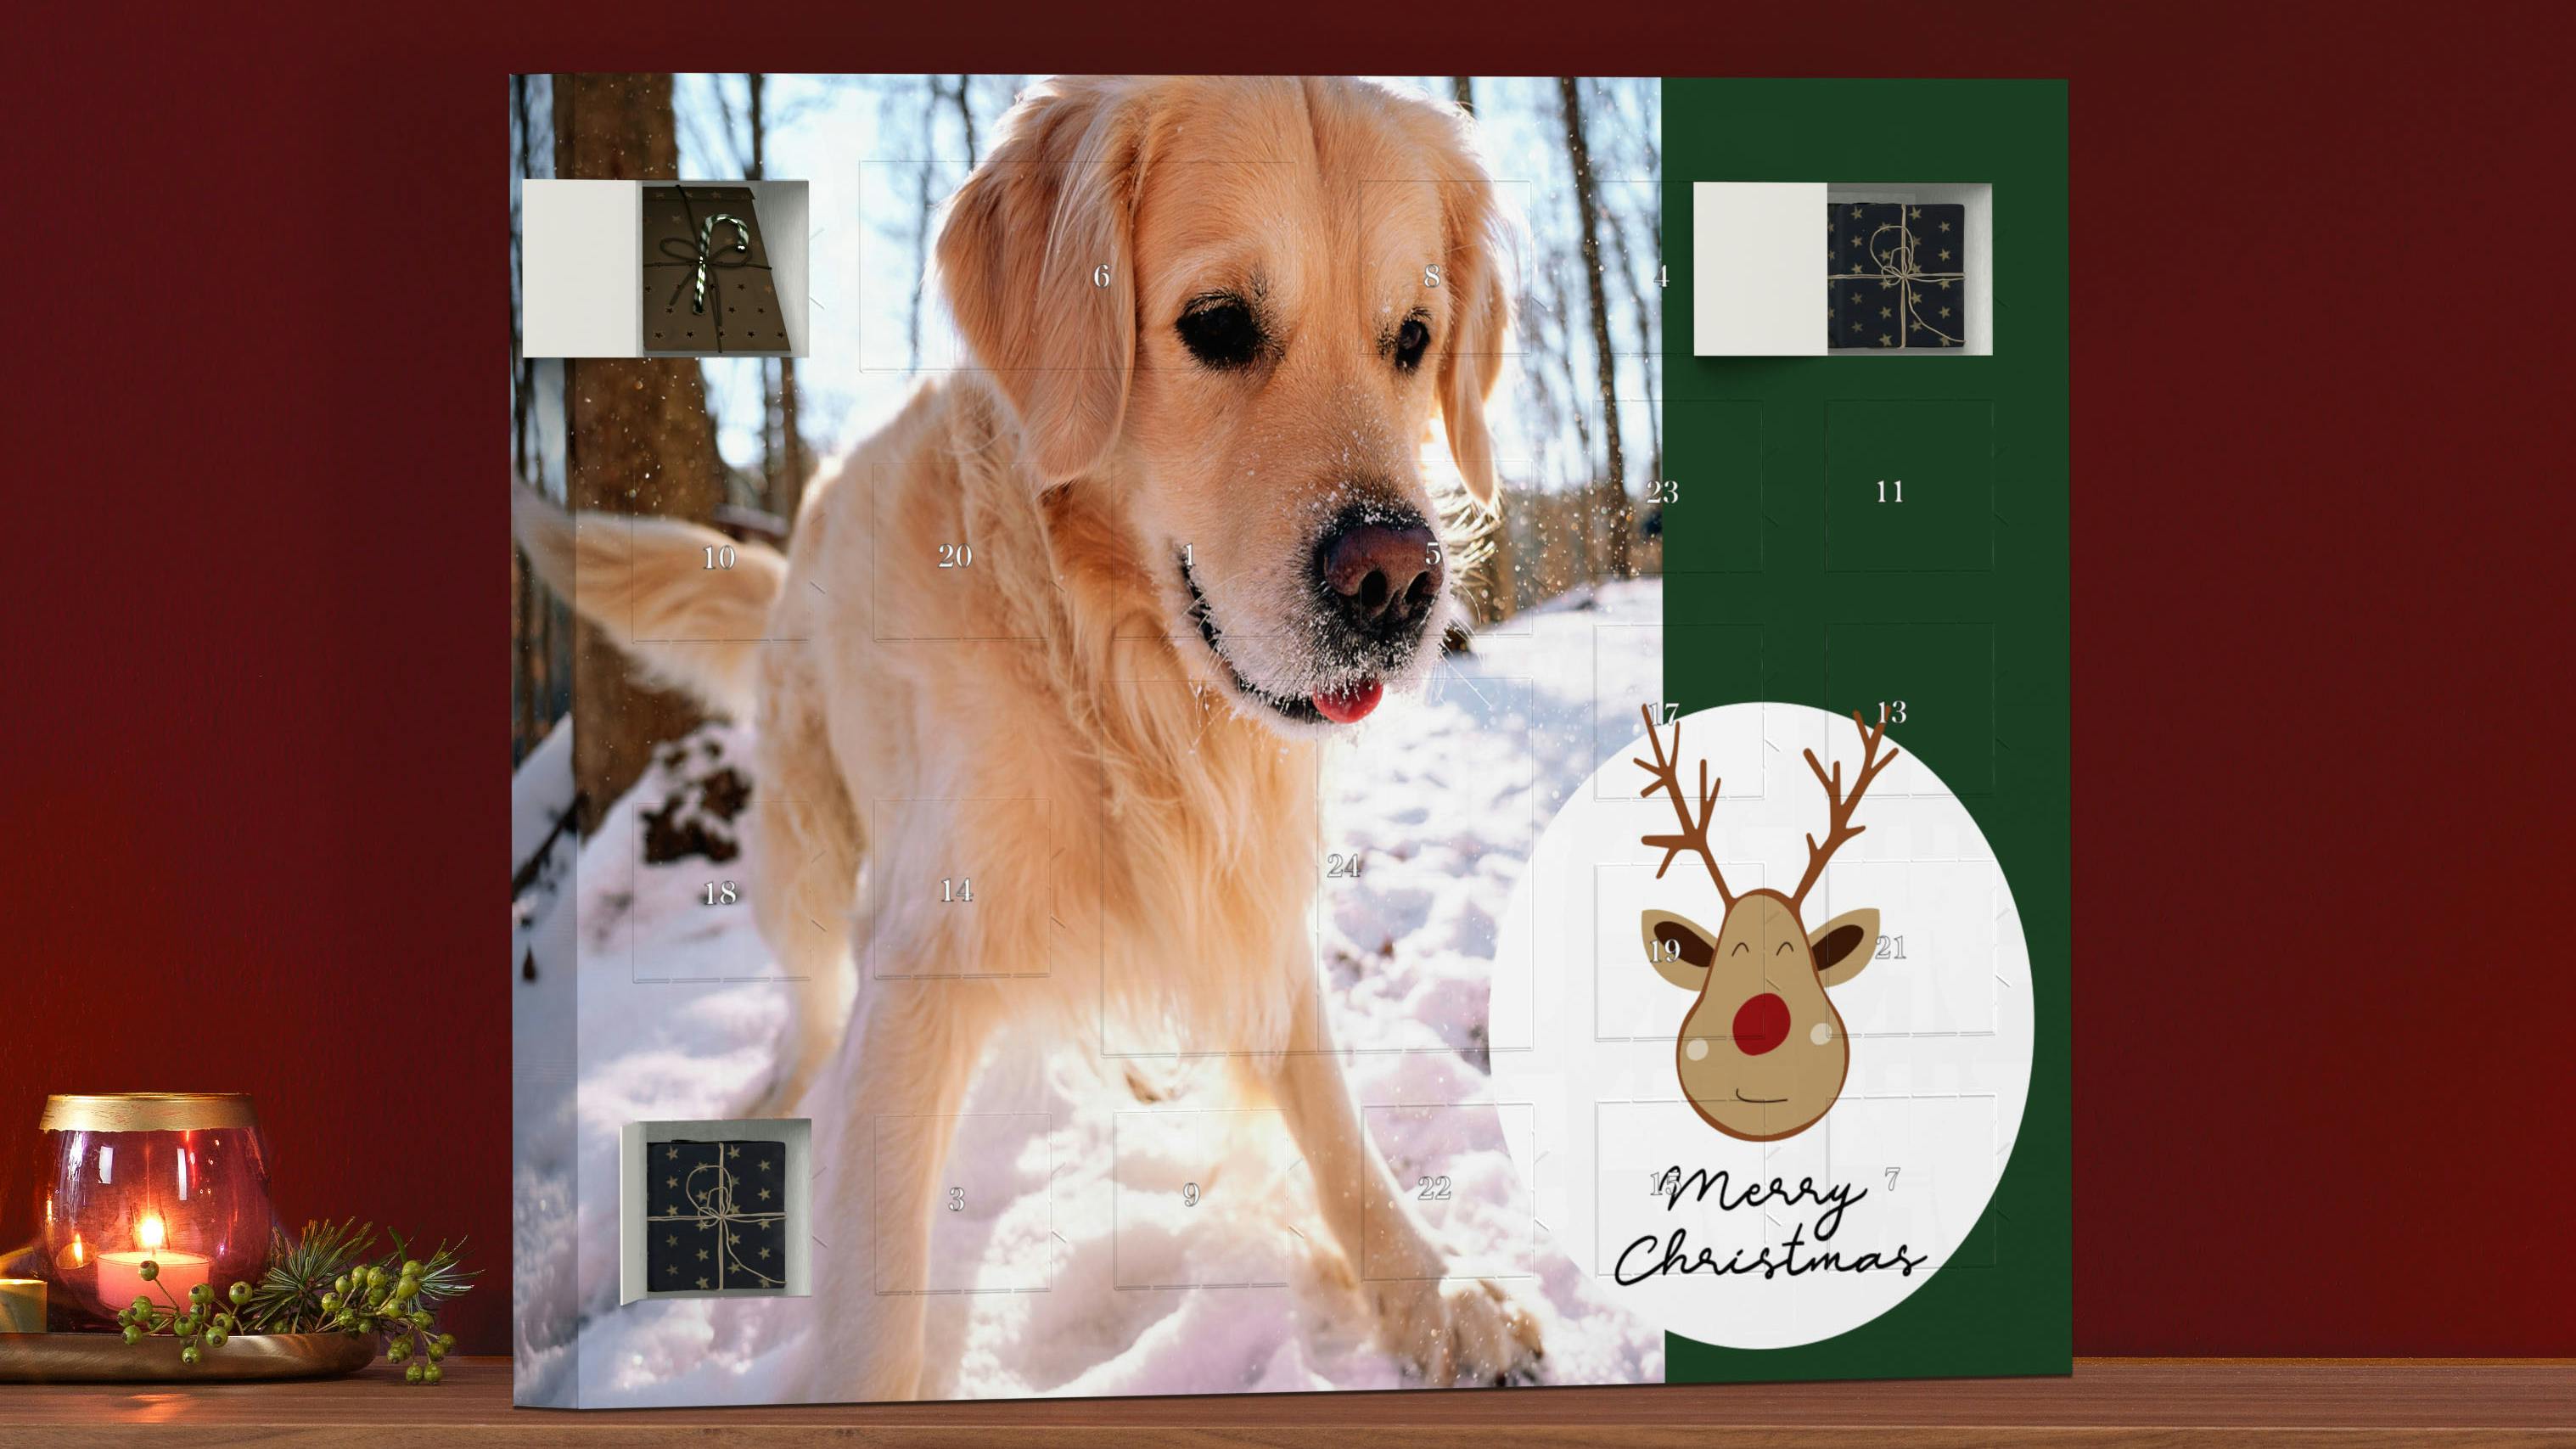 Photo Advent Calendar to fill yourself in landsccape format wit an image of a dog in a Christmas setting